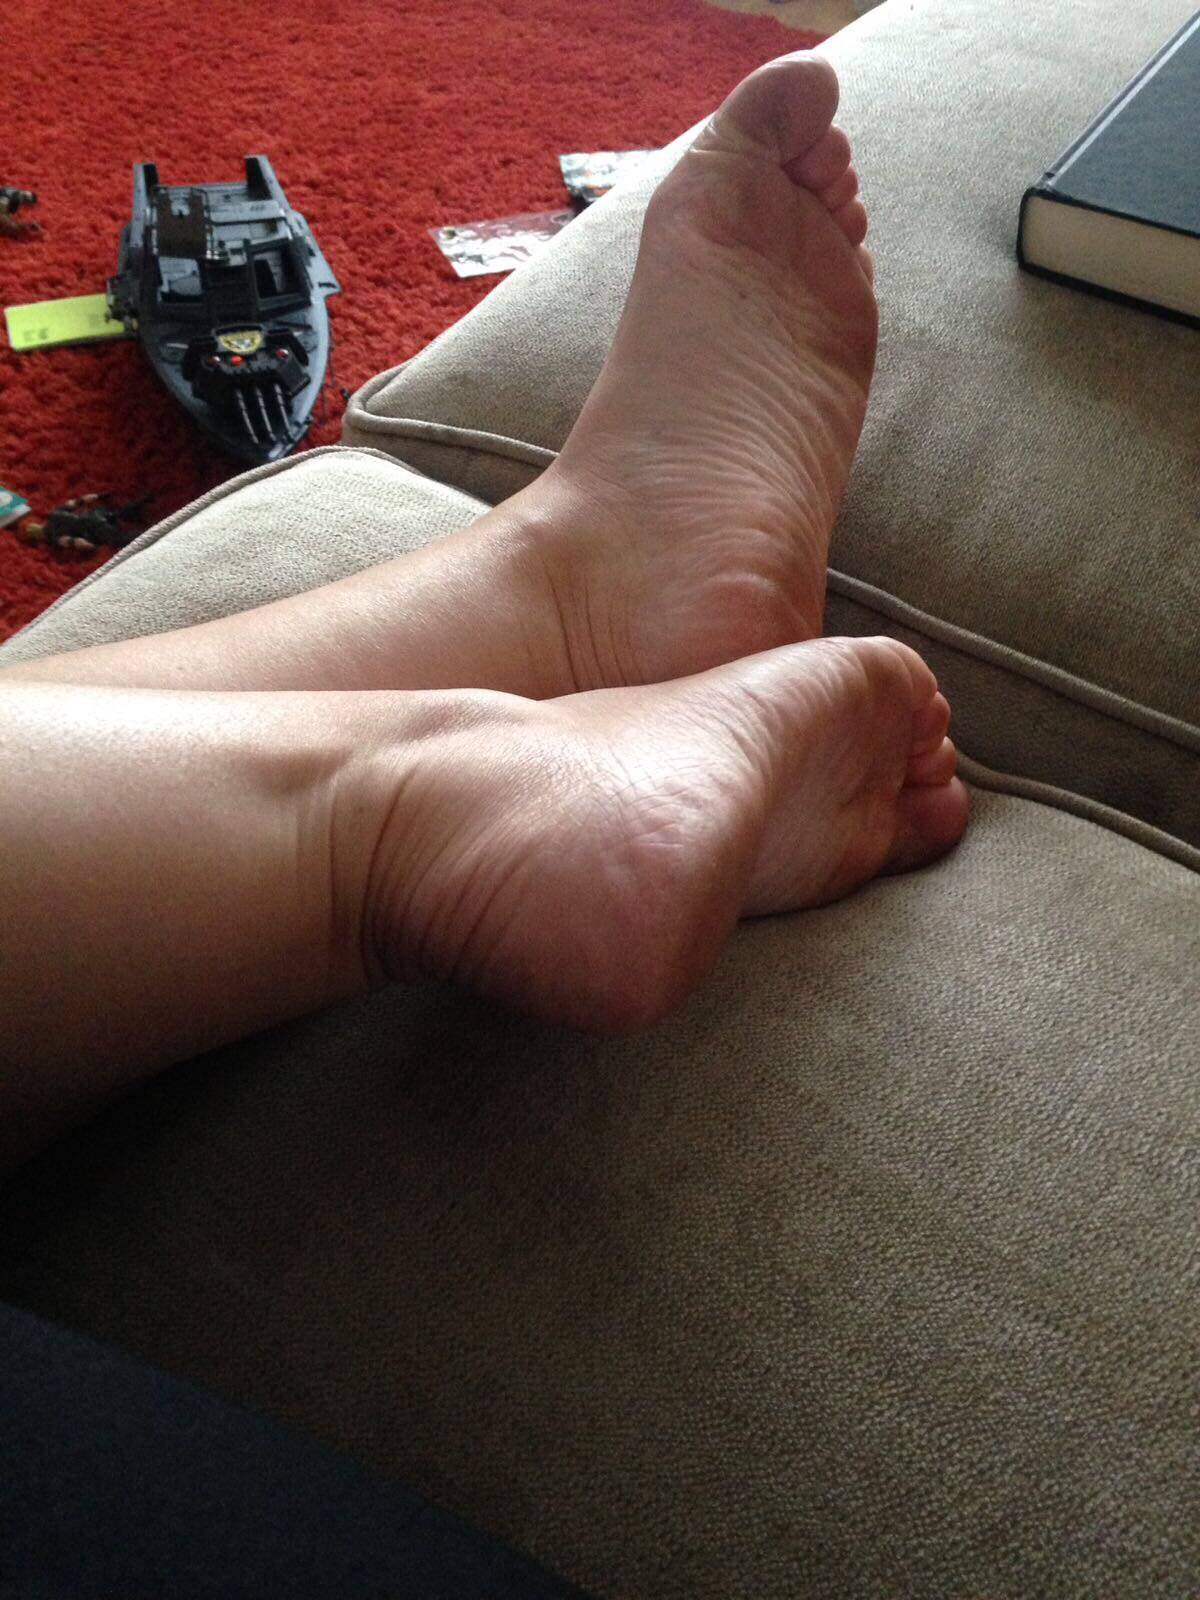 dane dudley recommends wifes sexy feet pic